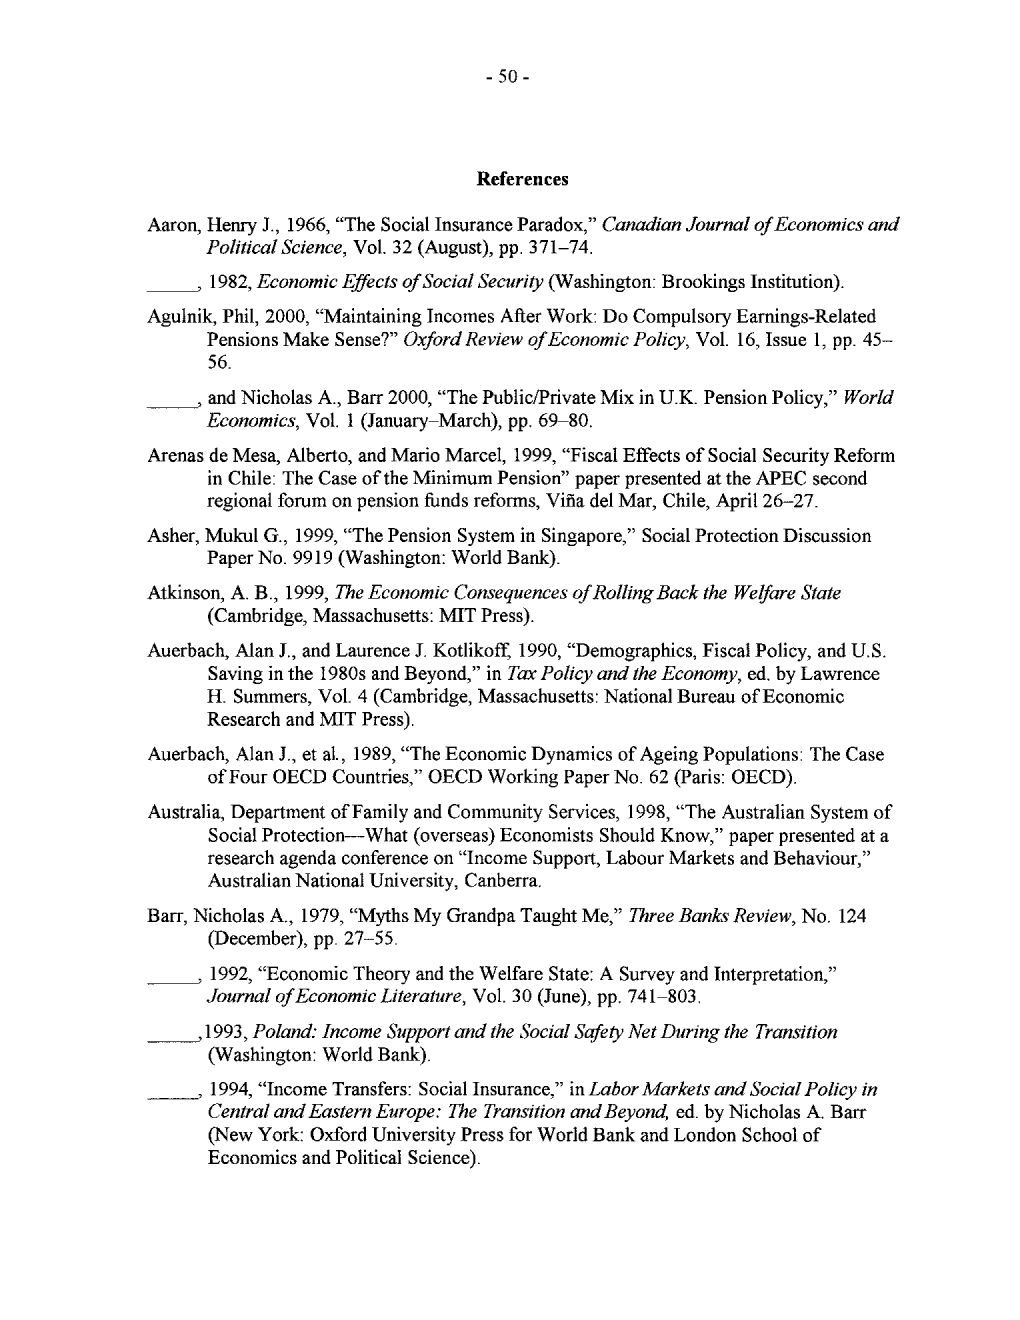 Canadian Journal of Economics and Political Science, Vol